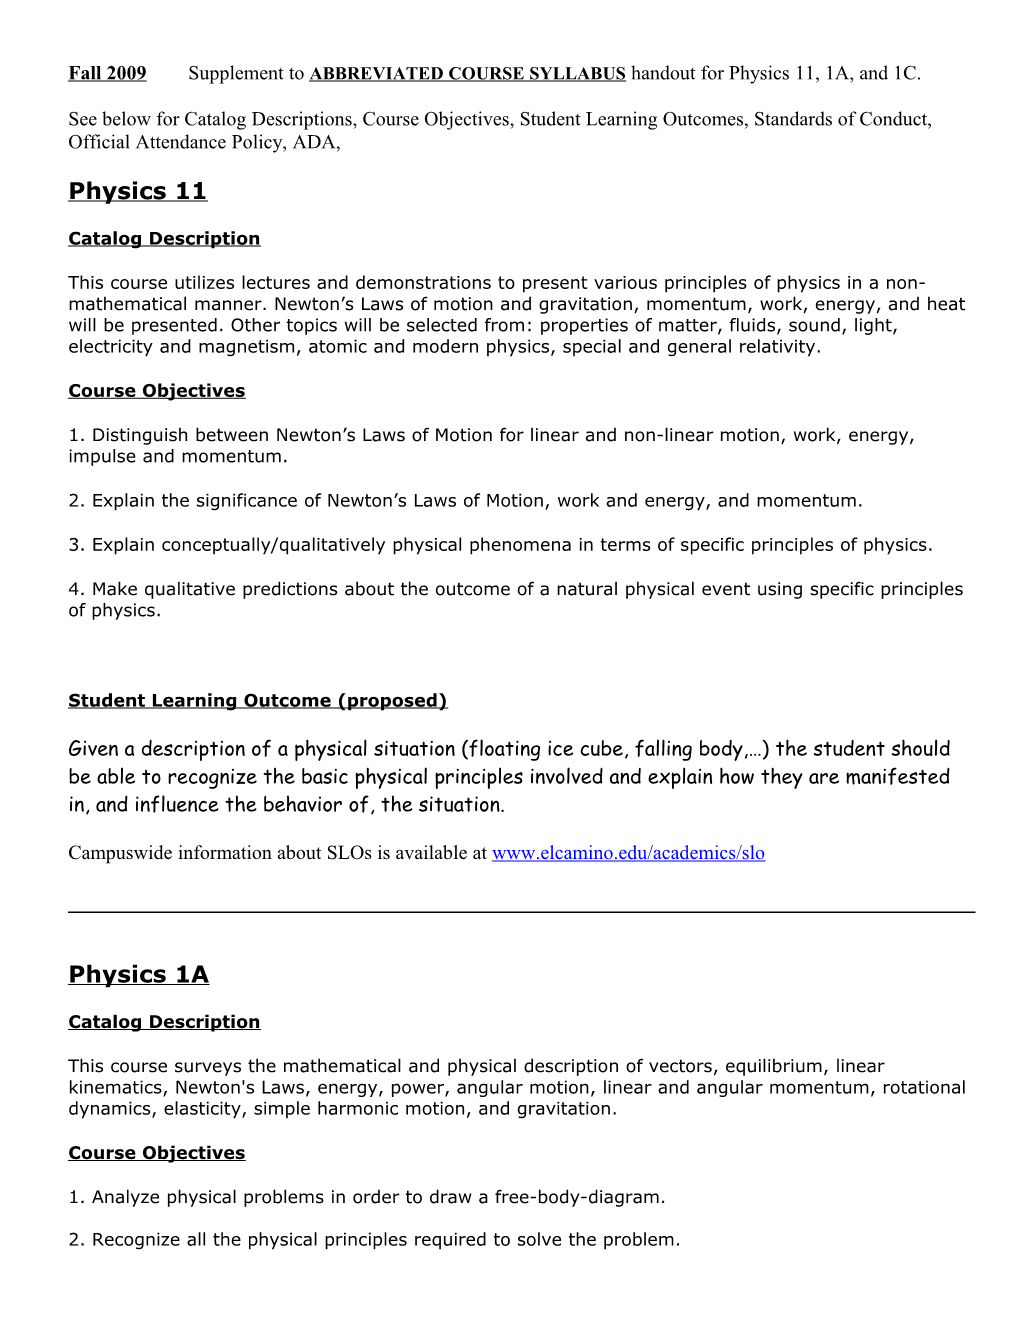 Supplement to Abbreviated Course Information Handouts for Physics 11, 1A, and 1C